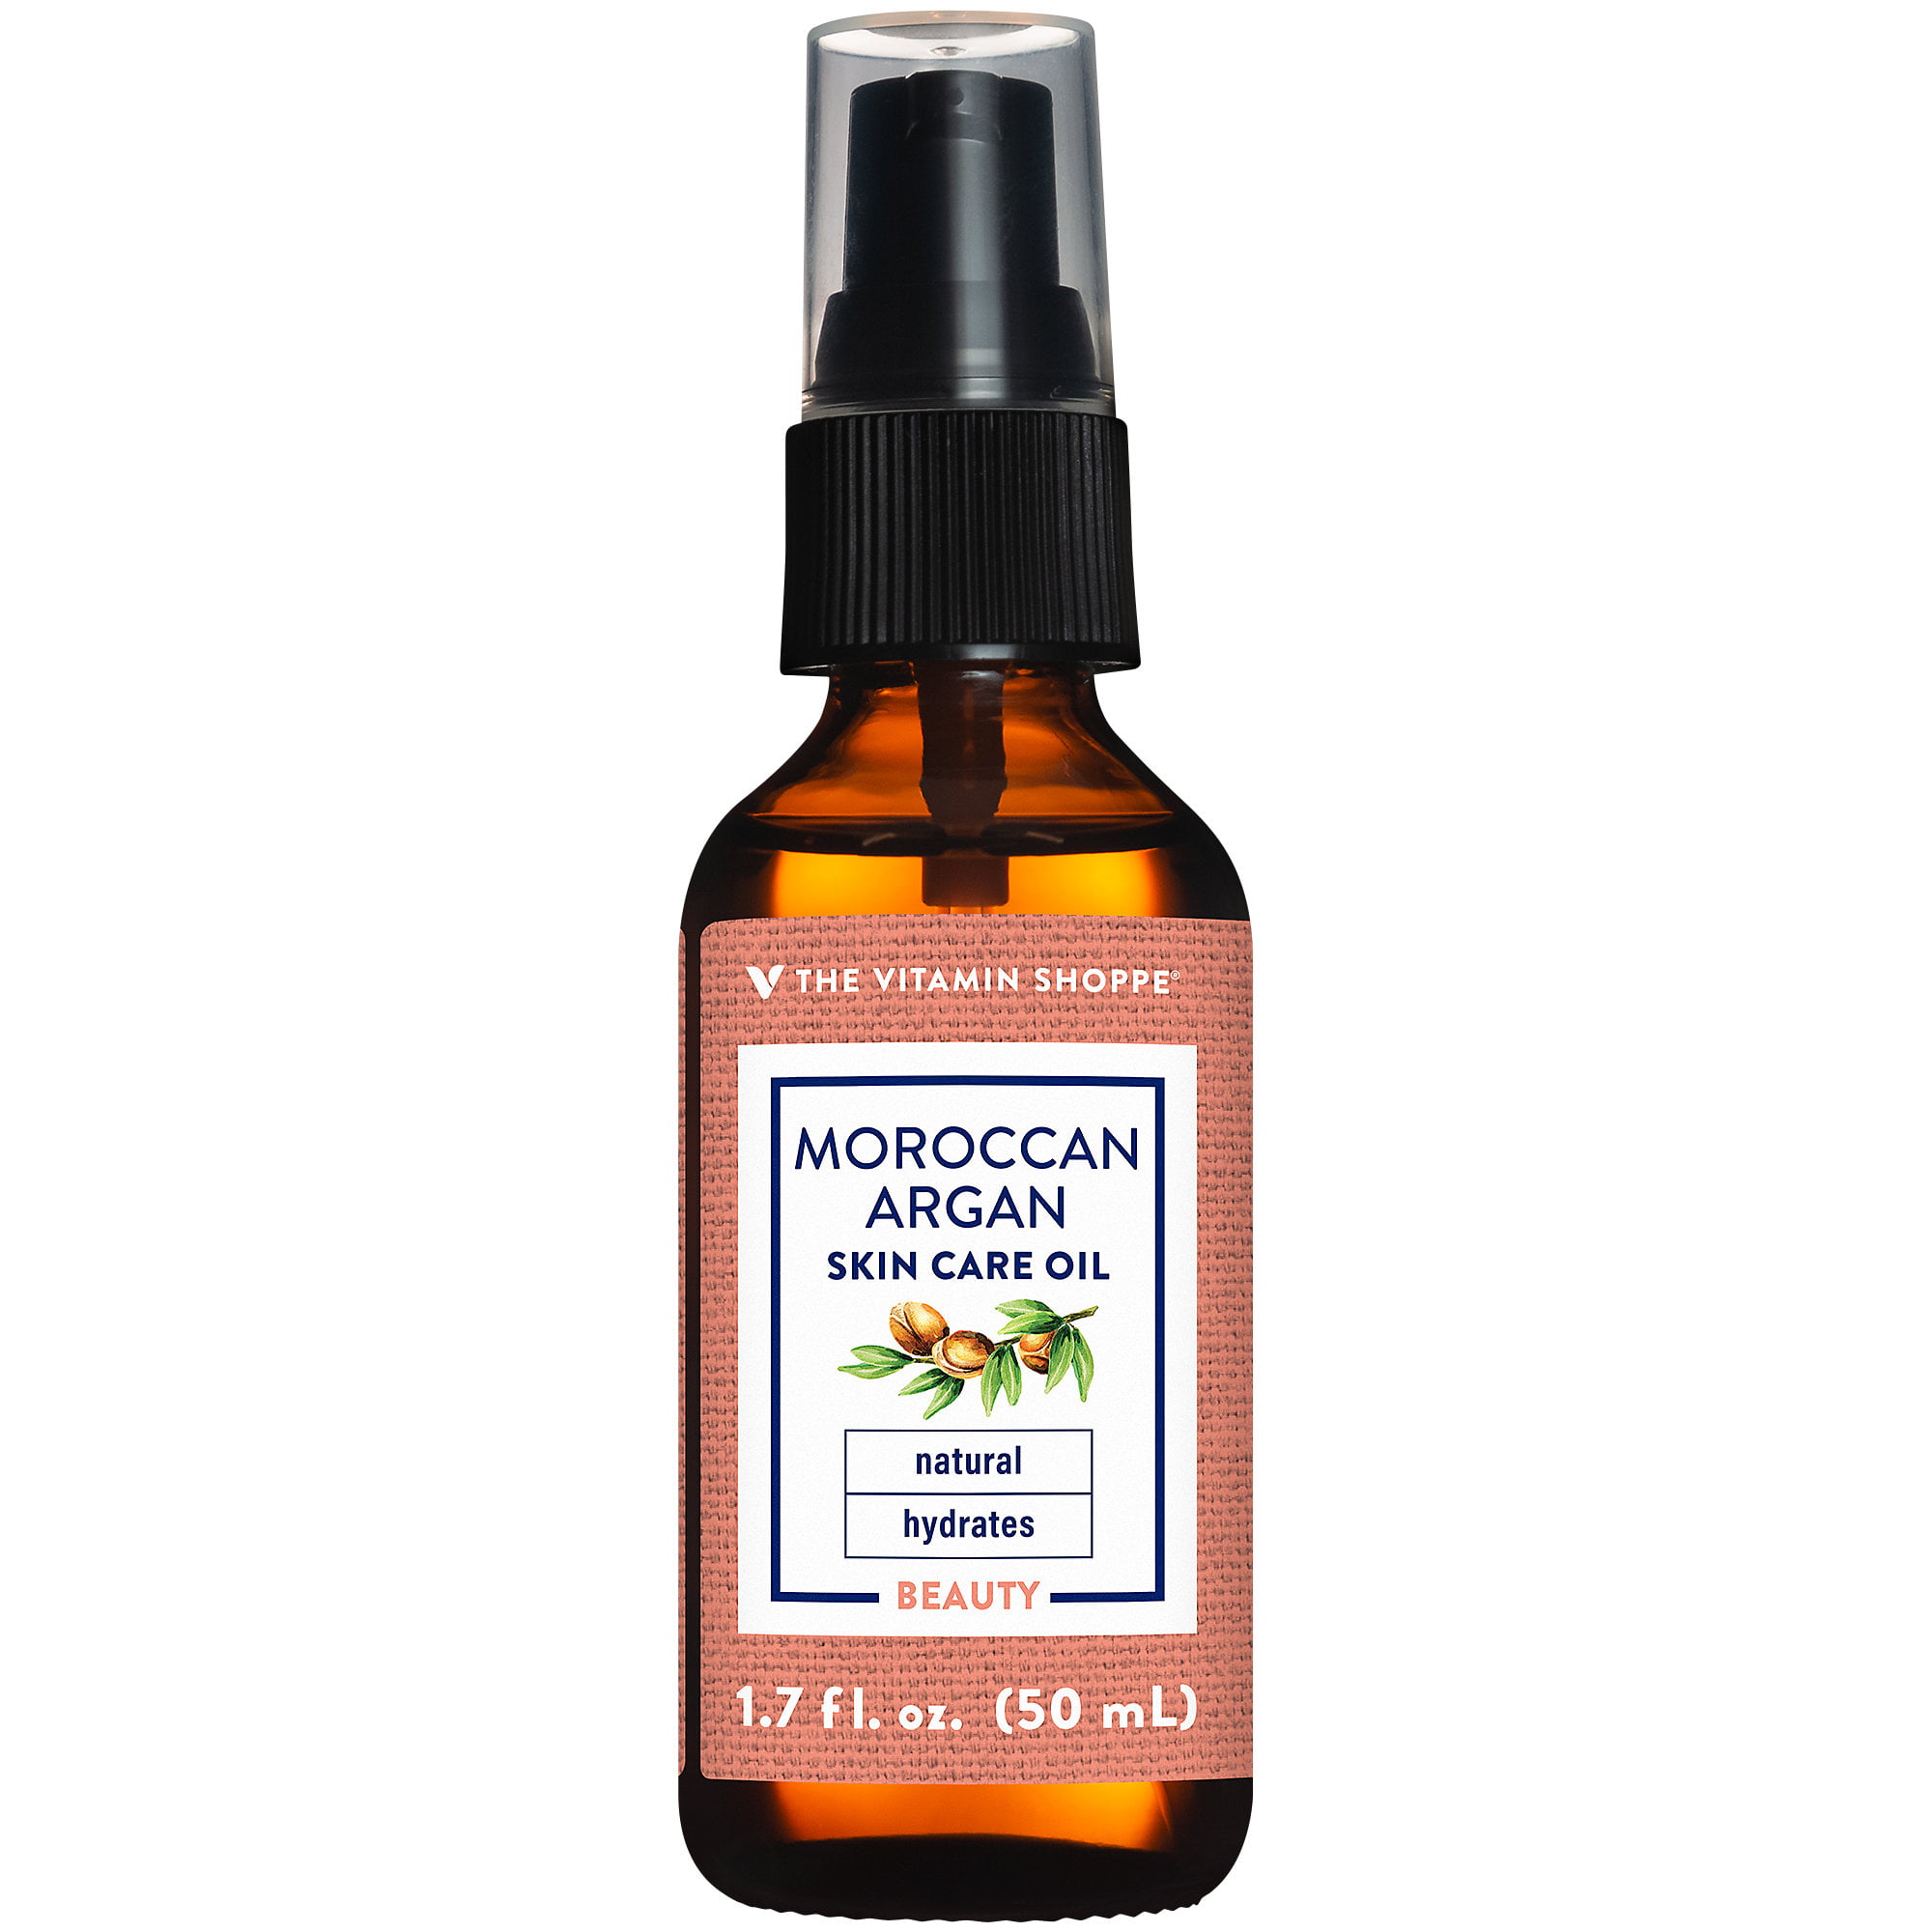 Moroccan Argan Skin Care Oil - Natural & Hydrates Beauty ( Fluid Ounces)  by the Vitamin Shoppe 